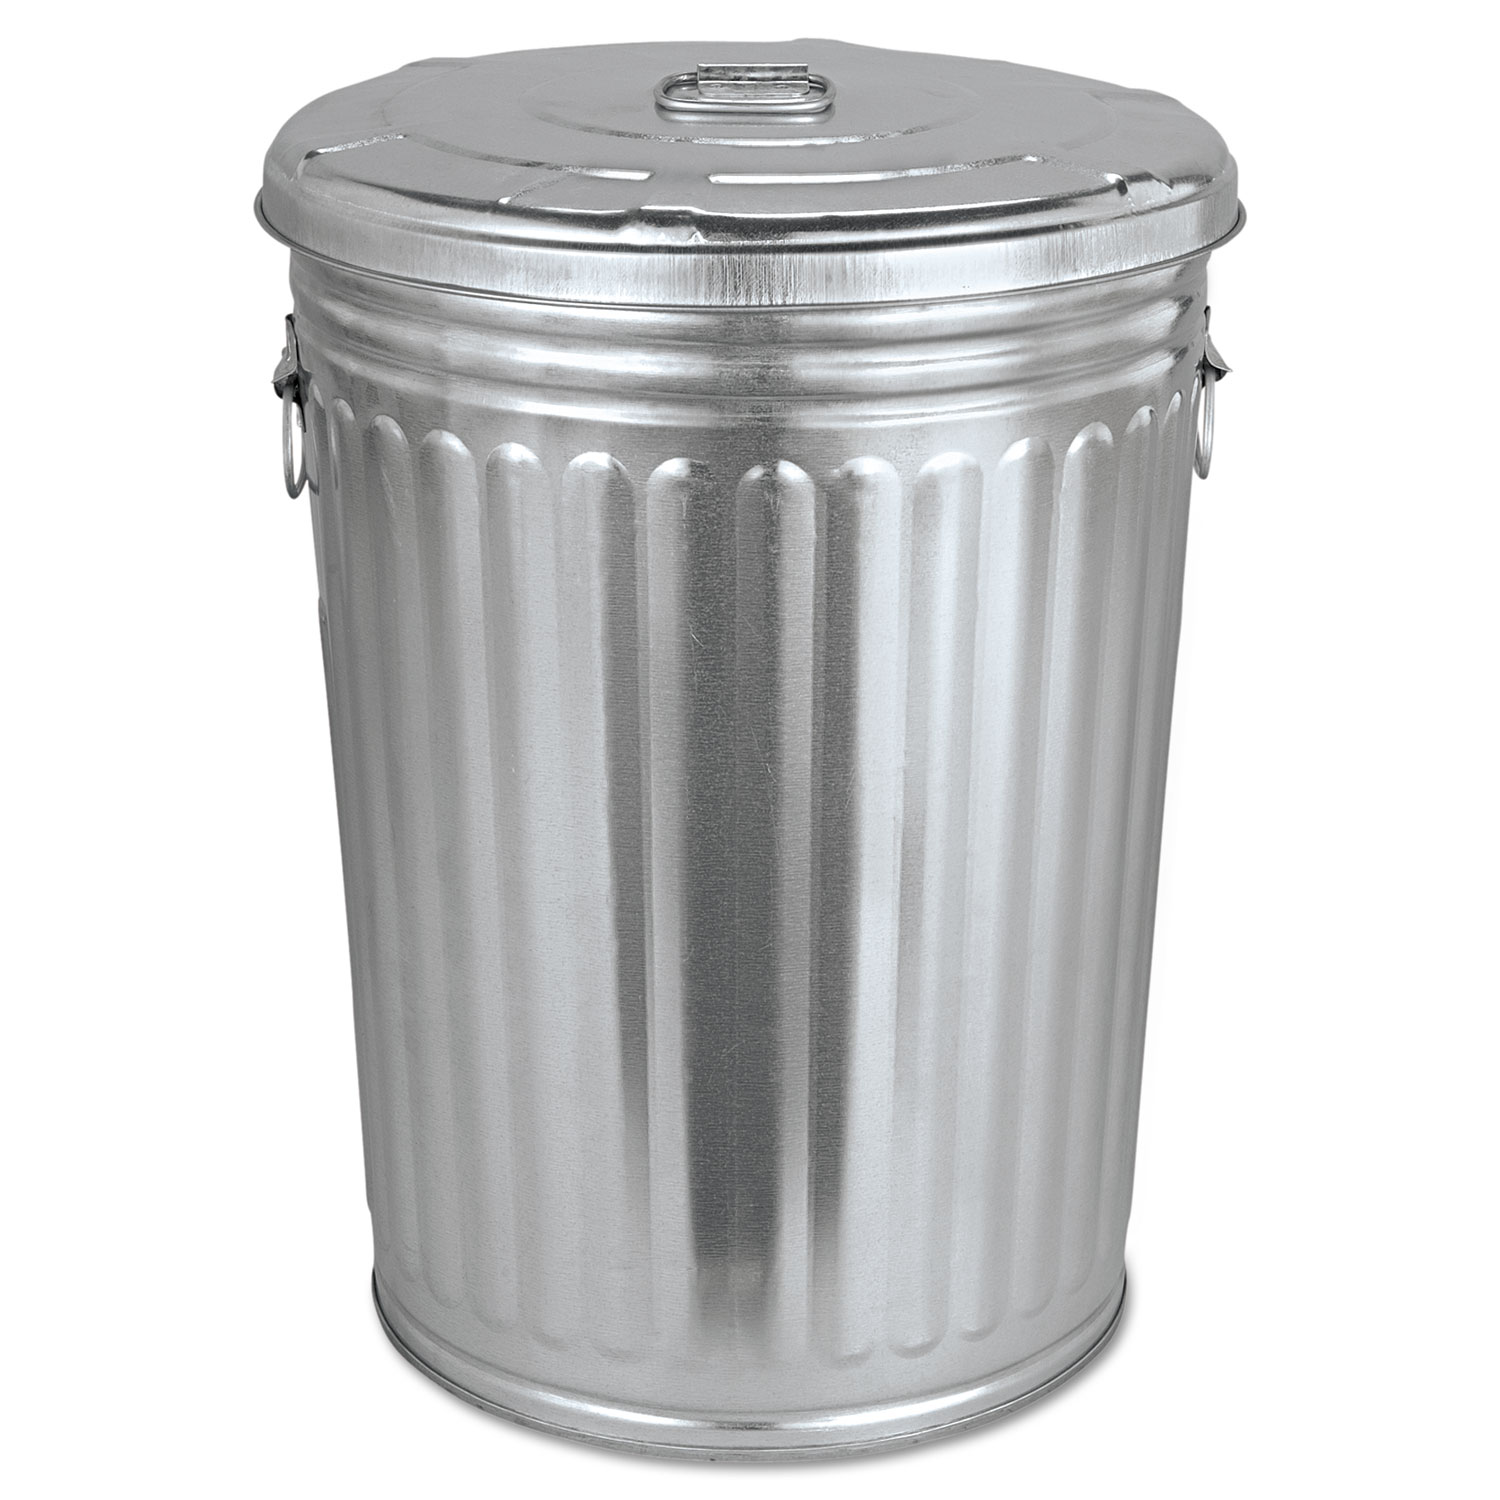  Magnolia Brush TRASH CAN 20GAL Pre-Galvanized Trash Can with Lid, Round, Steel, 20 gal, Gray (MNL20GALLONWLID) 